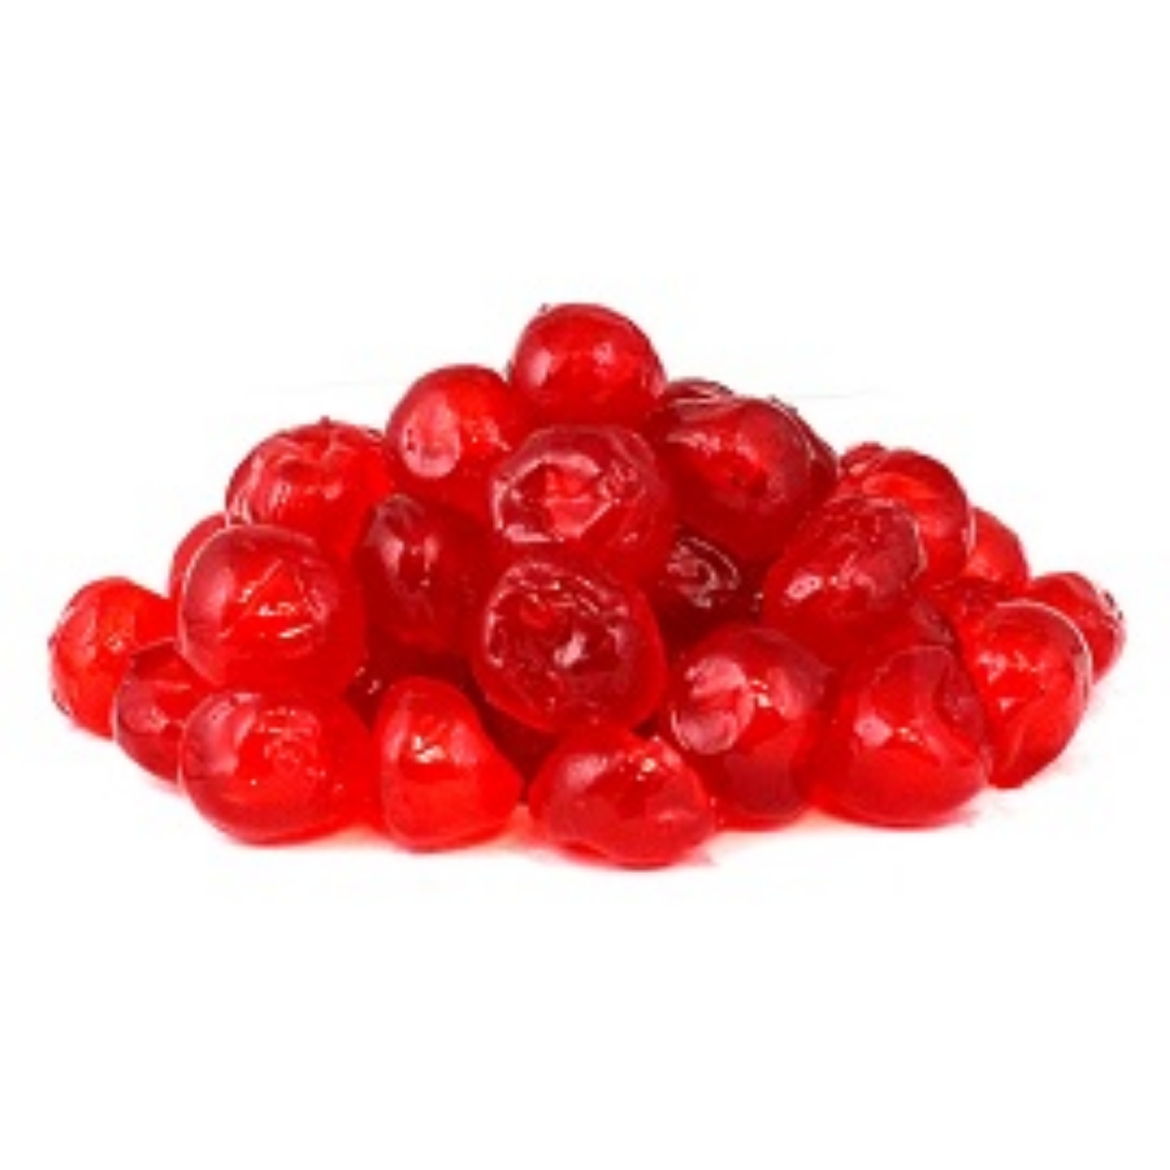 Picture of 1KG RED GLACE CHERRIES WHOLE